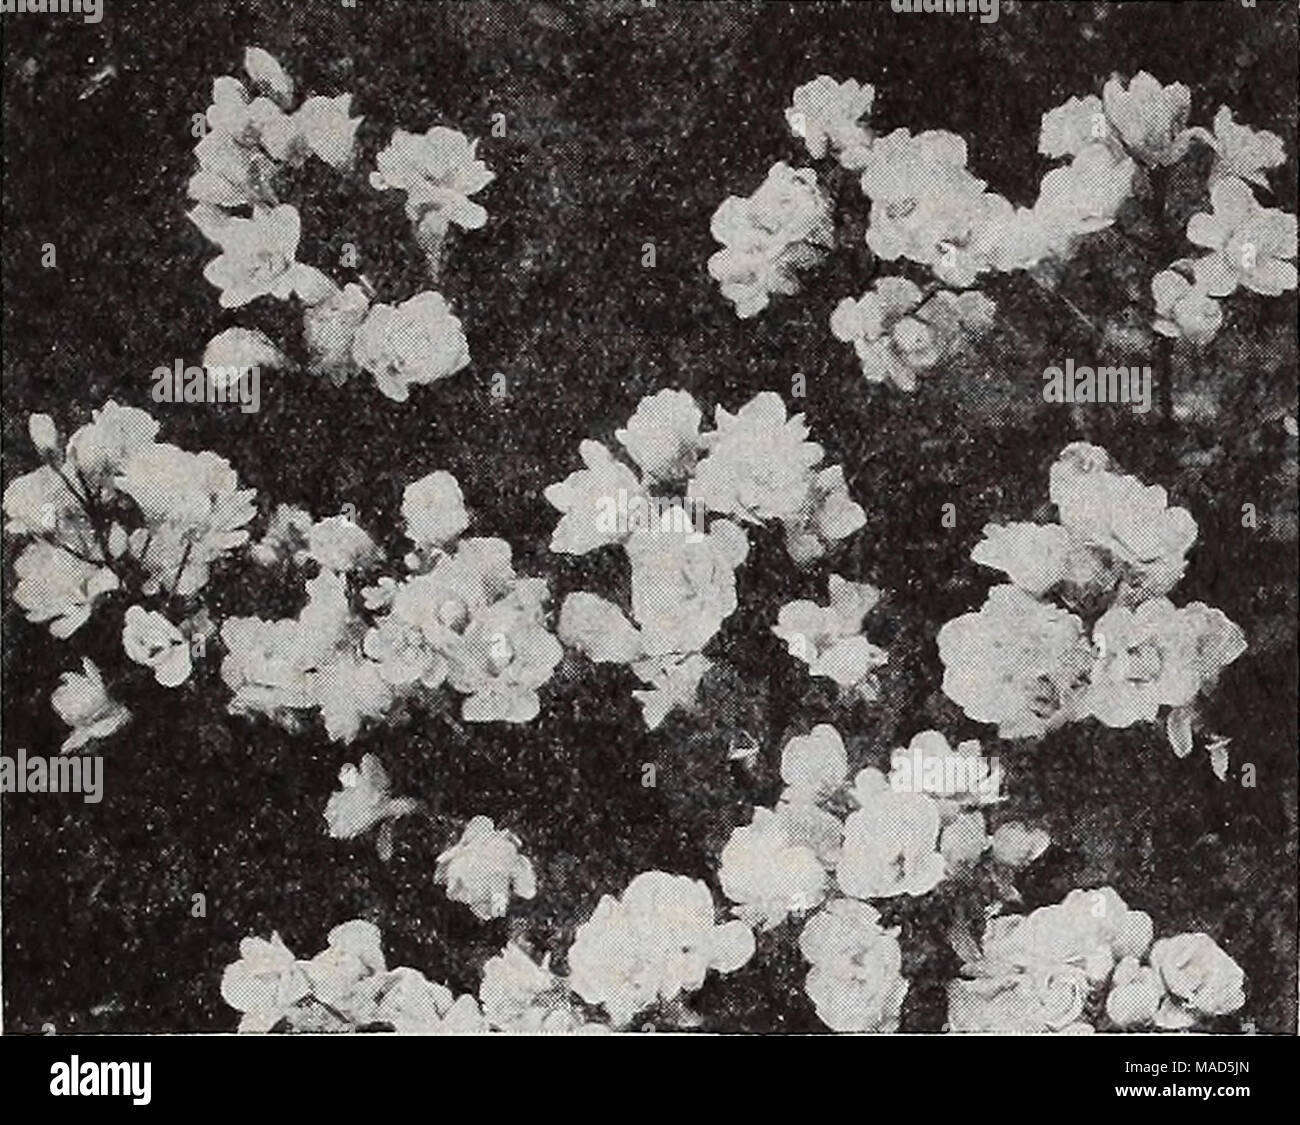 . Dreer's wholesale catalog for florists : winter spring summer 1937 . Arabis alpina flore plena Arabis—Rock Cress Per doz. Per 100 Alpina. Single white; 3-inch pots $1 50 $10 00 — fl. pi. 3-inch pots 2 50 15 00 — rosea. 3-inch pots 2 50 15 00 Arenaria—Sandwort Montana. 3-inch pots 1 50 10 00 Verna caespitosa. 3-incli pots 1 50 10 00 Armaria—Thrift, Sea Pink Cephalotes, Bees Ruby. Has stout stems with large globular heads of brilliant ruby-red flowers. 3-inch pots.' 3 50 25 00 — rubra. 3-inch pots 1 50 10 00 Iiaucheana rosea. 3-inch pots 1 50 10 00 Maritima alba. 3-inch pots 1 50 10 00 Artemis Stock Photo